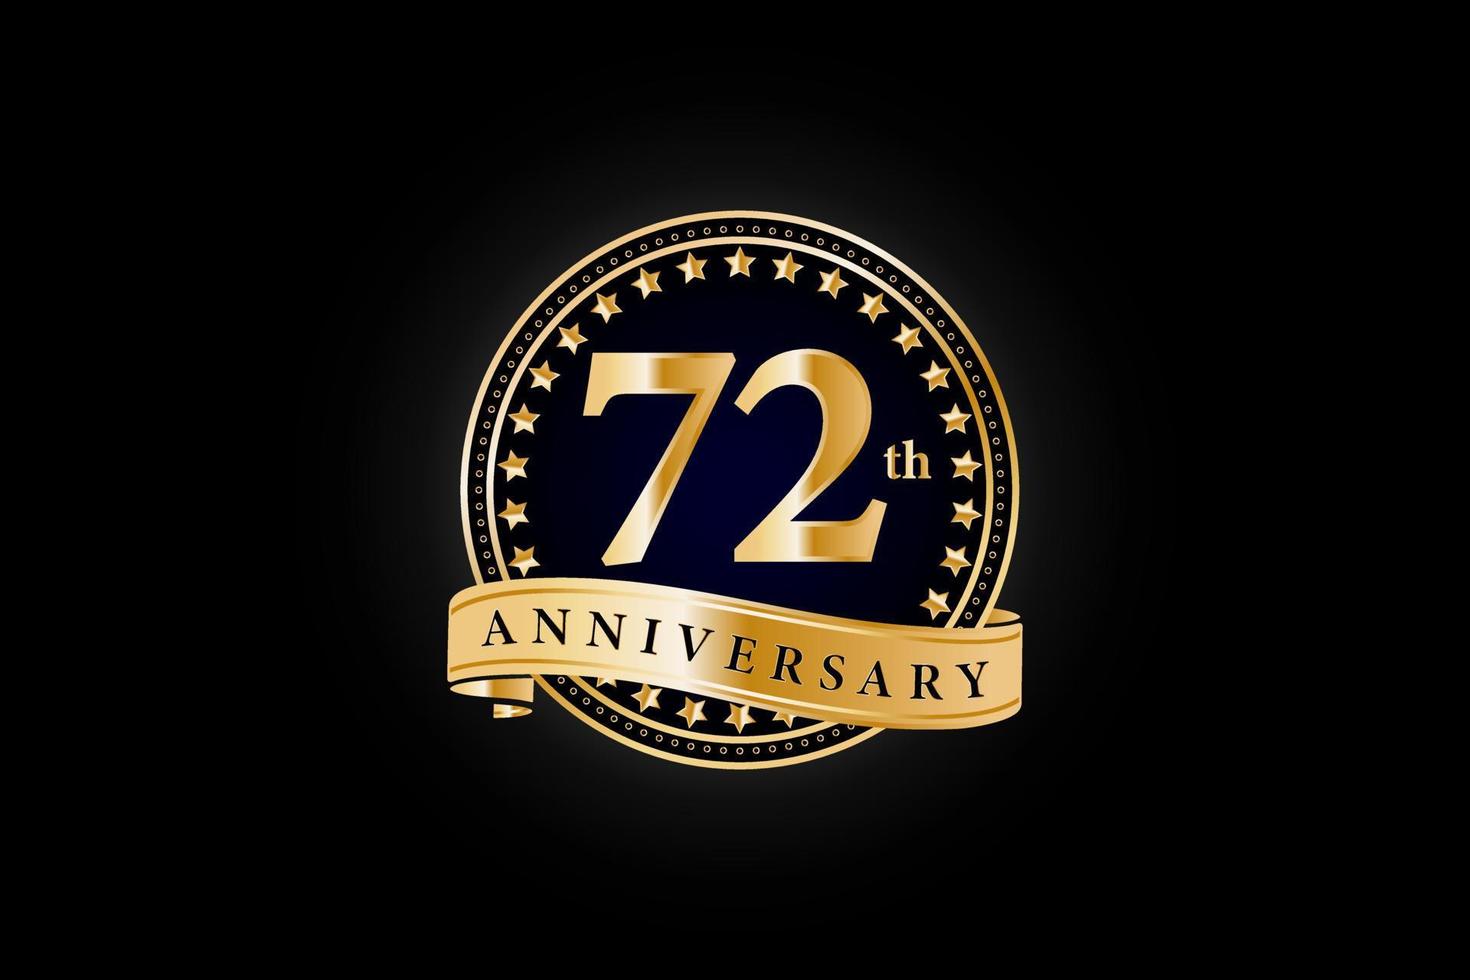 72th Anniversary golden gold logo with ring and gold ribbon isolated on black background, vector design for celebration.